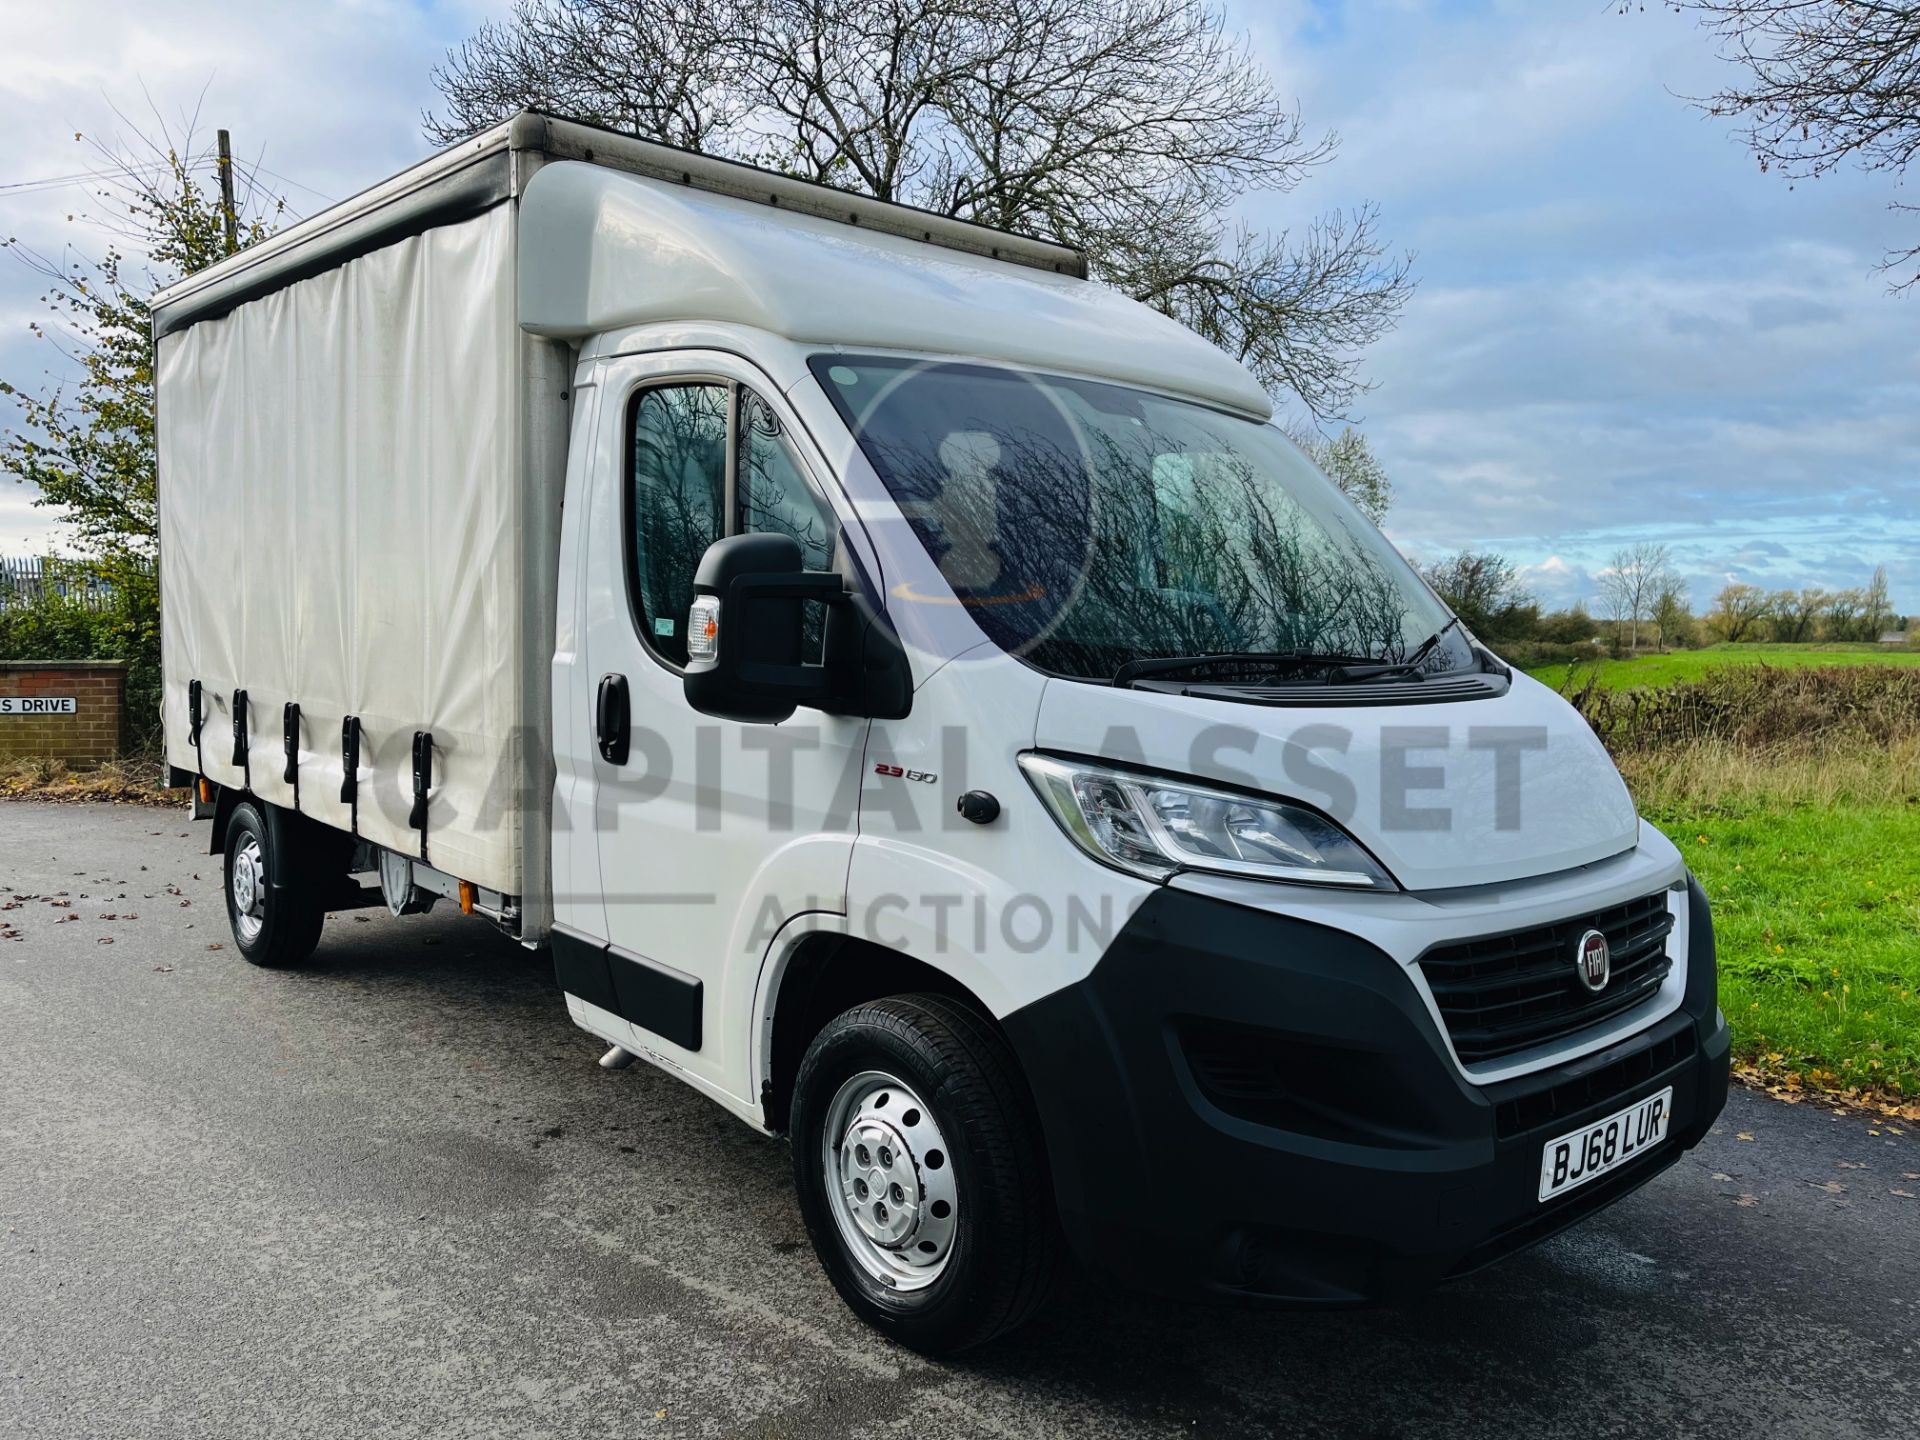 (ON SALE) FIAT DUCATO 2.3 MULTIJET (2019 MODEL) RARE CURTAIN SIDE BODY - 1 OWNER - 360 CAMERA VIEW - Image 3 of 24